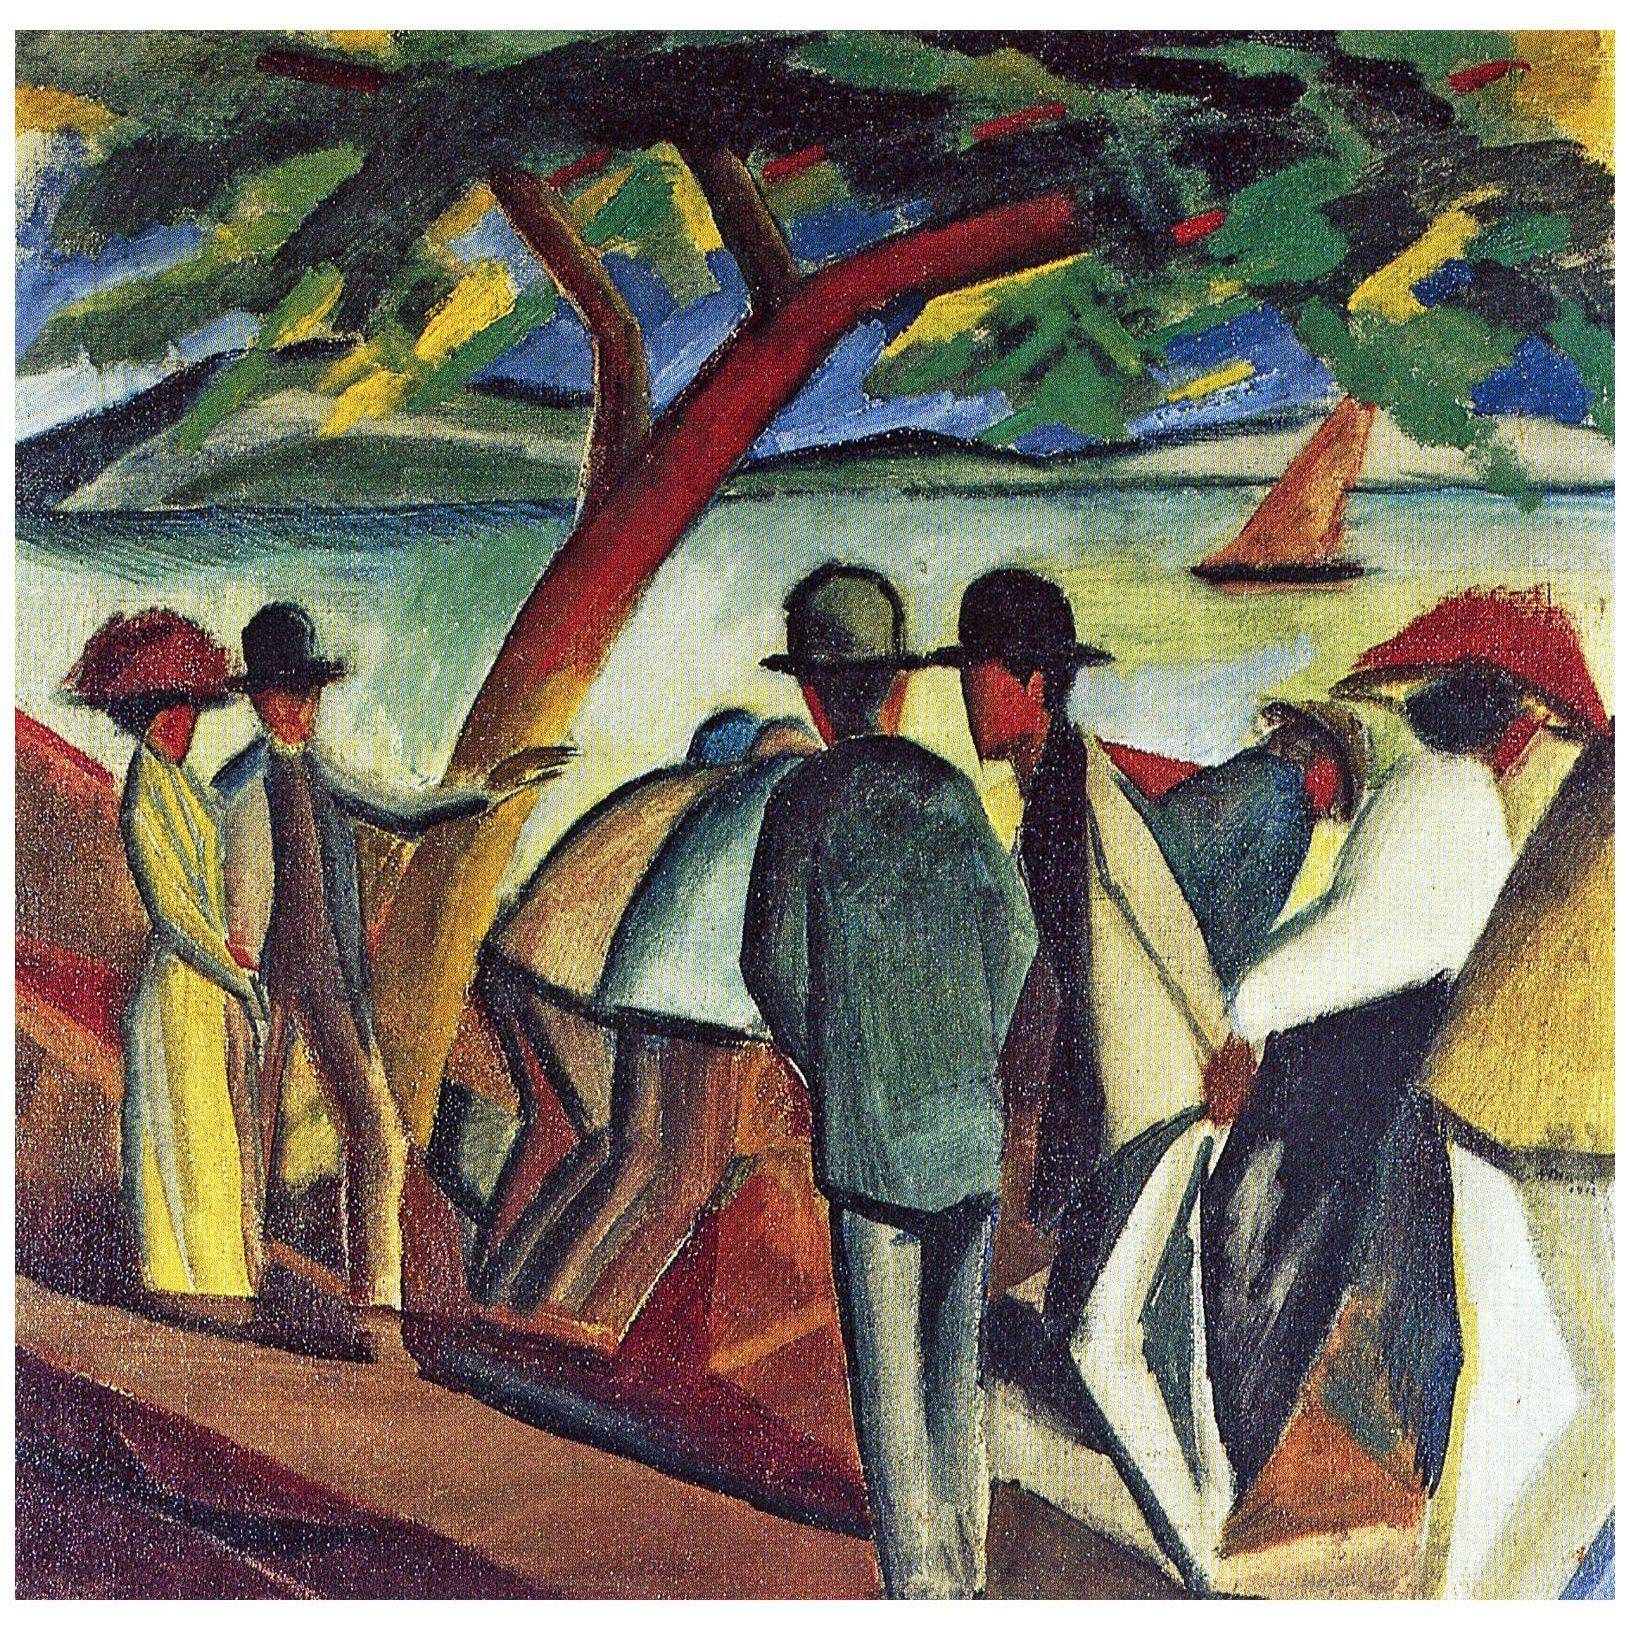 August Macke. Spaziergänger am See I. 1912. Private collection